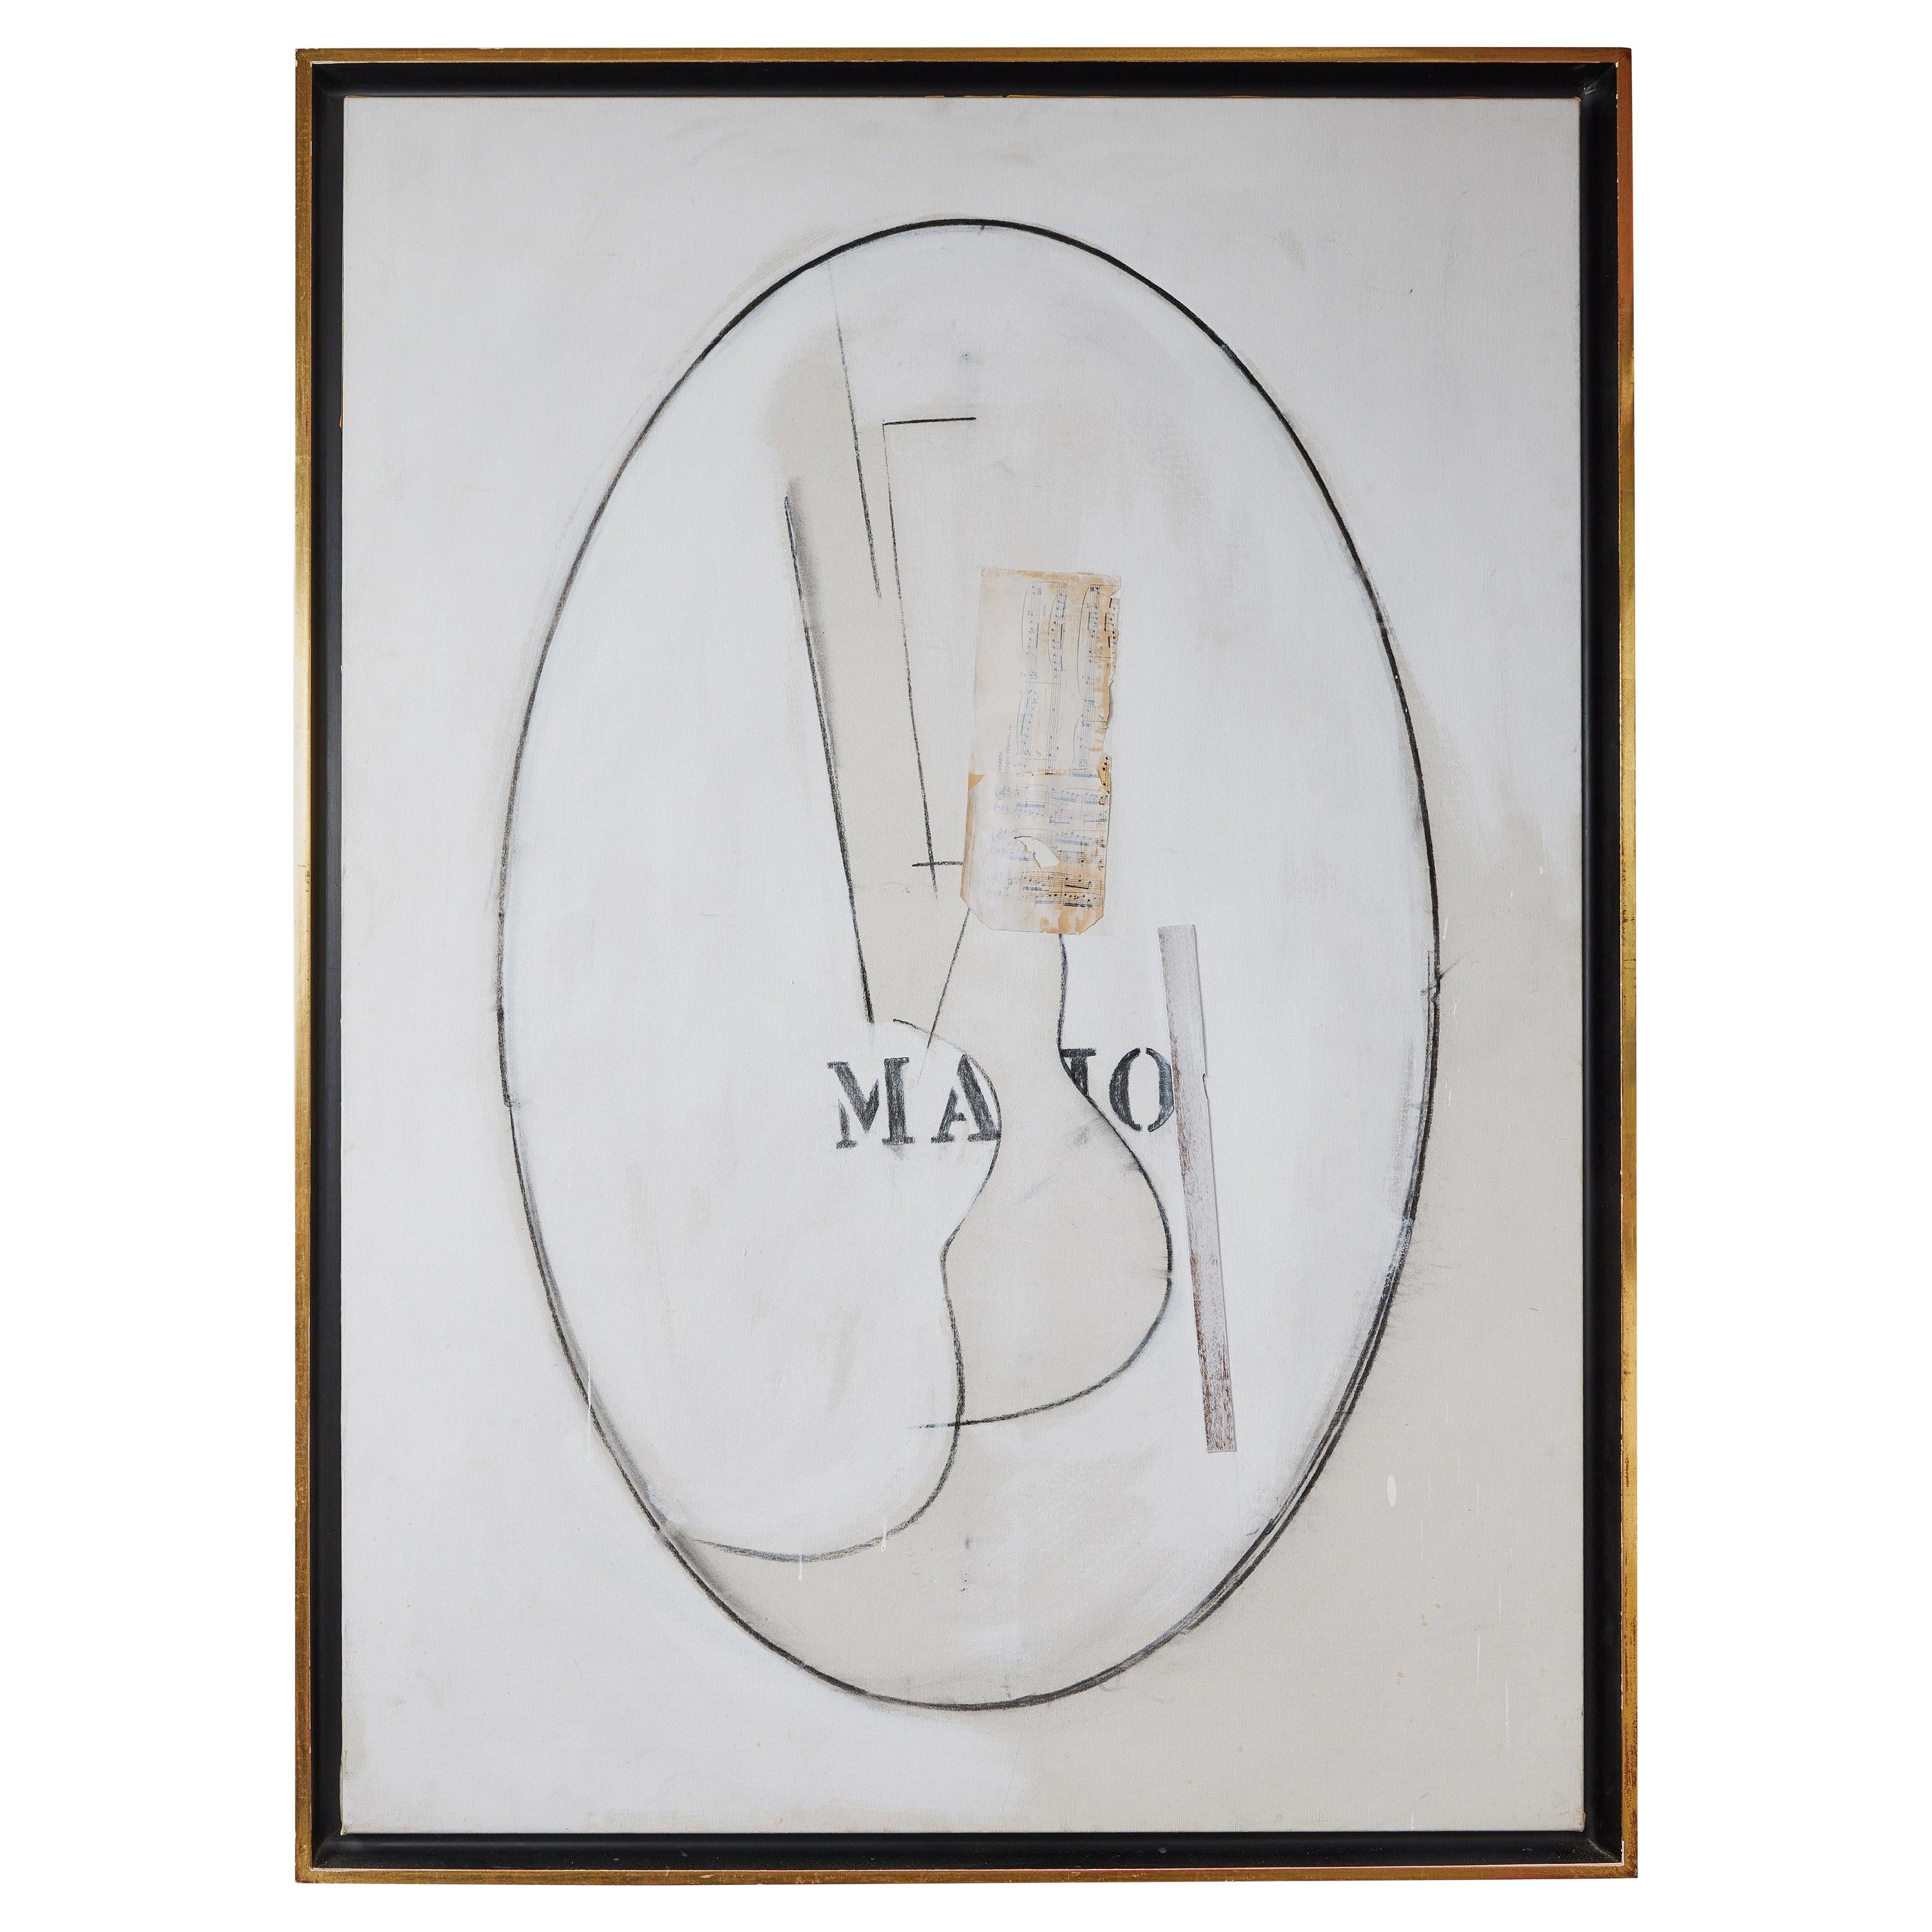 A signed, dated, 1970’s, acrylic, charcoal, paper and jute collage-on-canvas by notable, listed American artist, Stephen Edlich (1944-1989). Inscribed Majo, 1976-1977 on the reverse. Select public collections: Art Institute of Chicago, IL; The